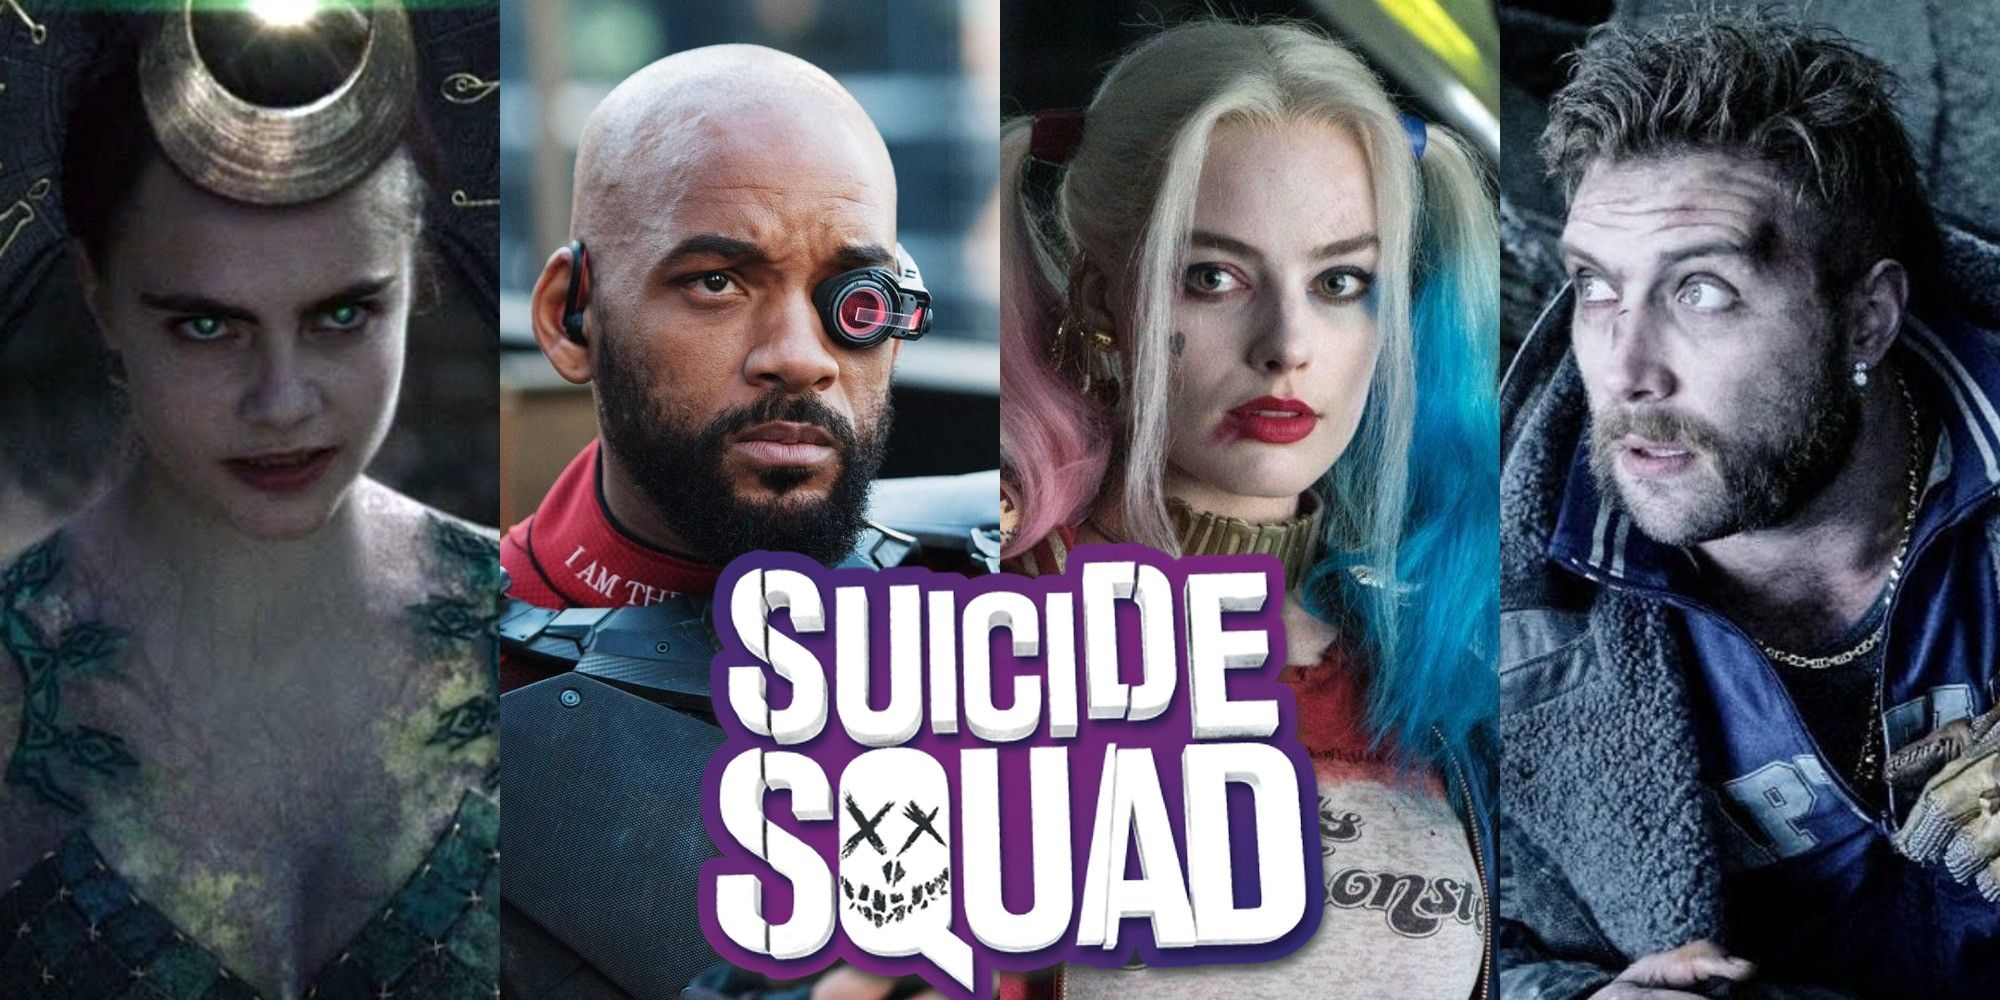 A collage of the faces of Enchantress, Deadshot, Harley Quinn and Captain Boomerang in Suicide Squad with the logo over the top